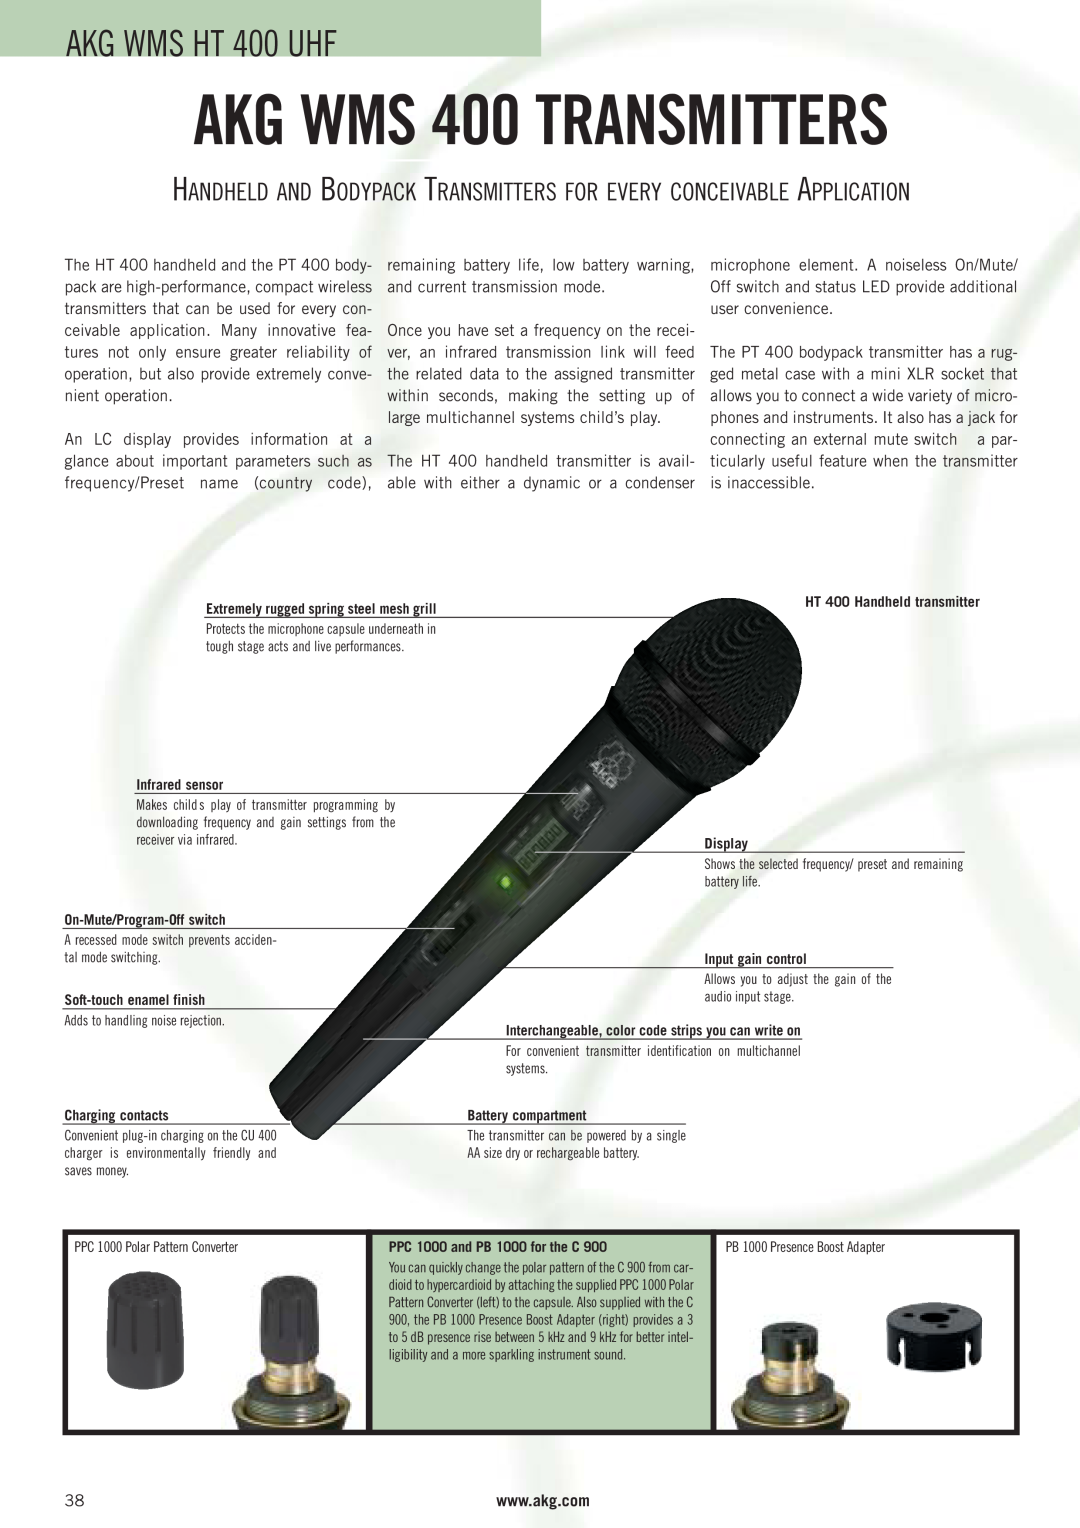 AKG Acoustics WMS 4000 manual AKG WMS HT 400 UHF, Handheld And Bodypack Transmitters For Every Conceivable Application 